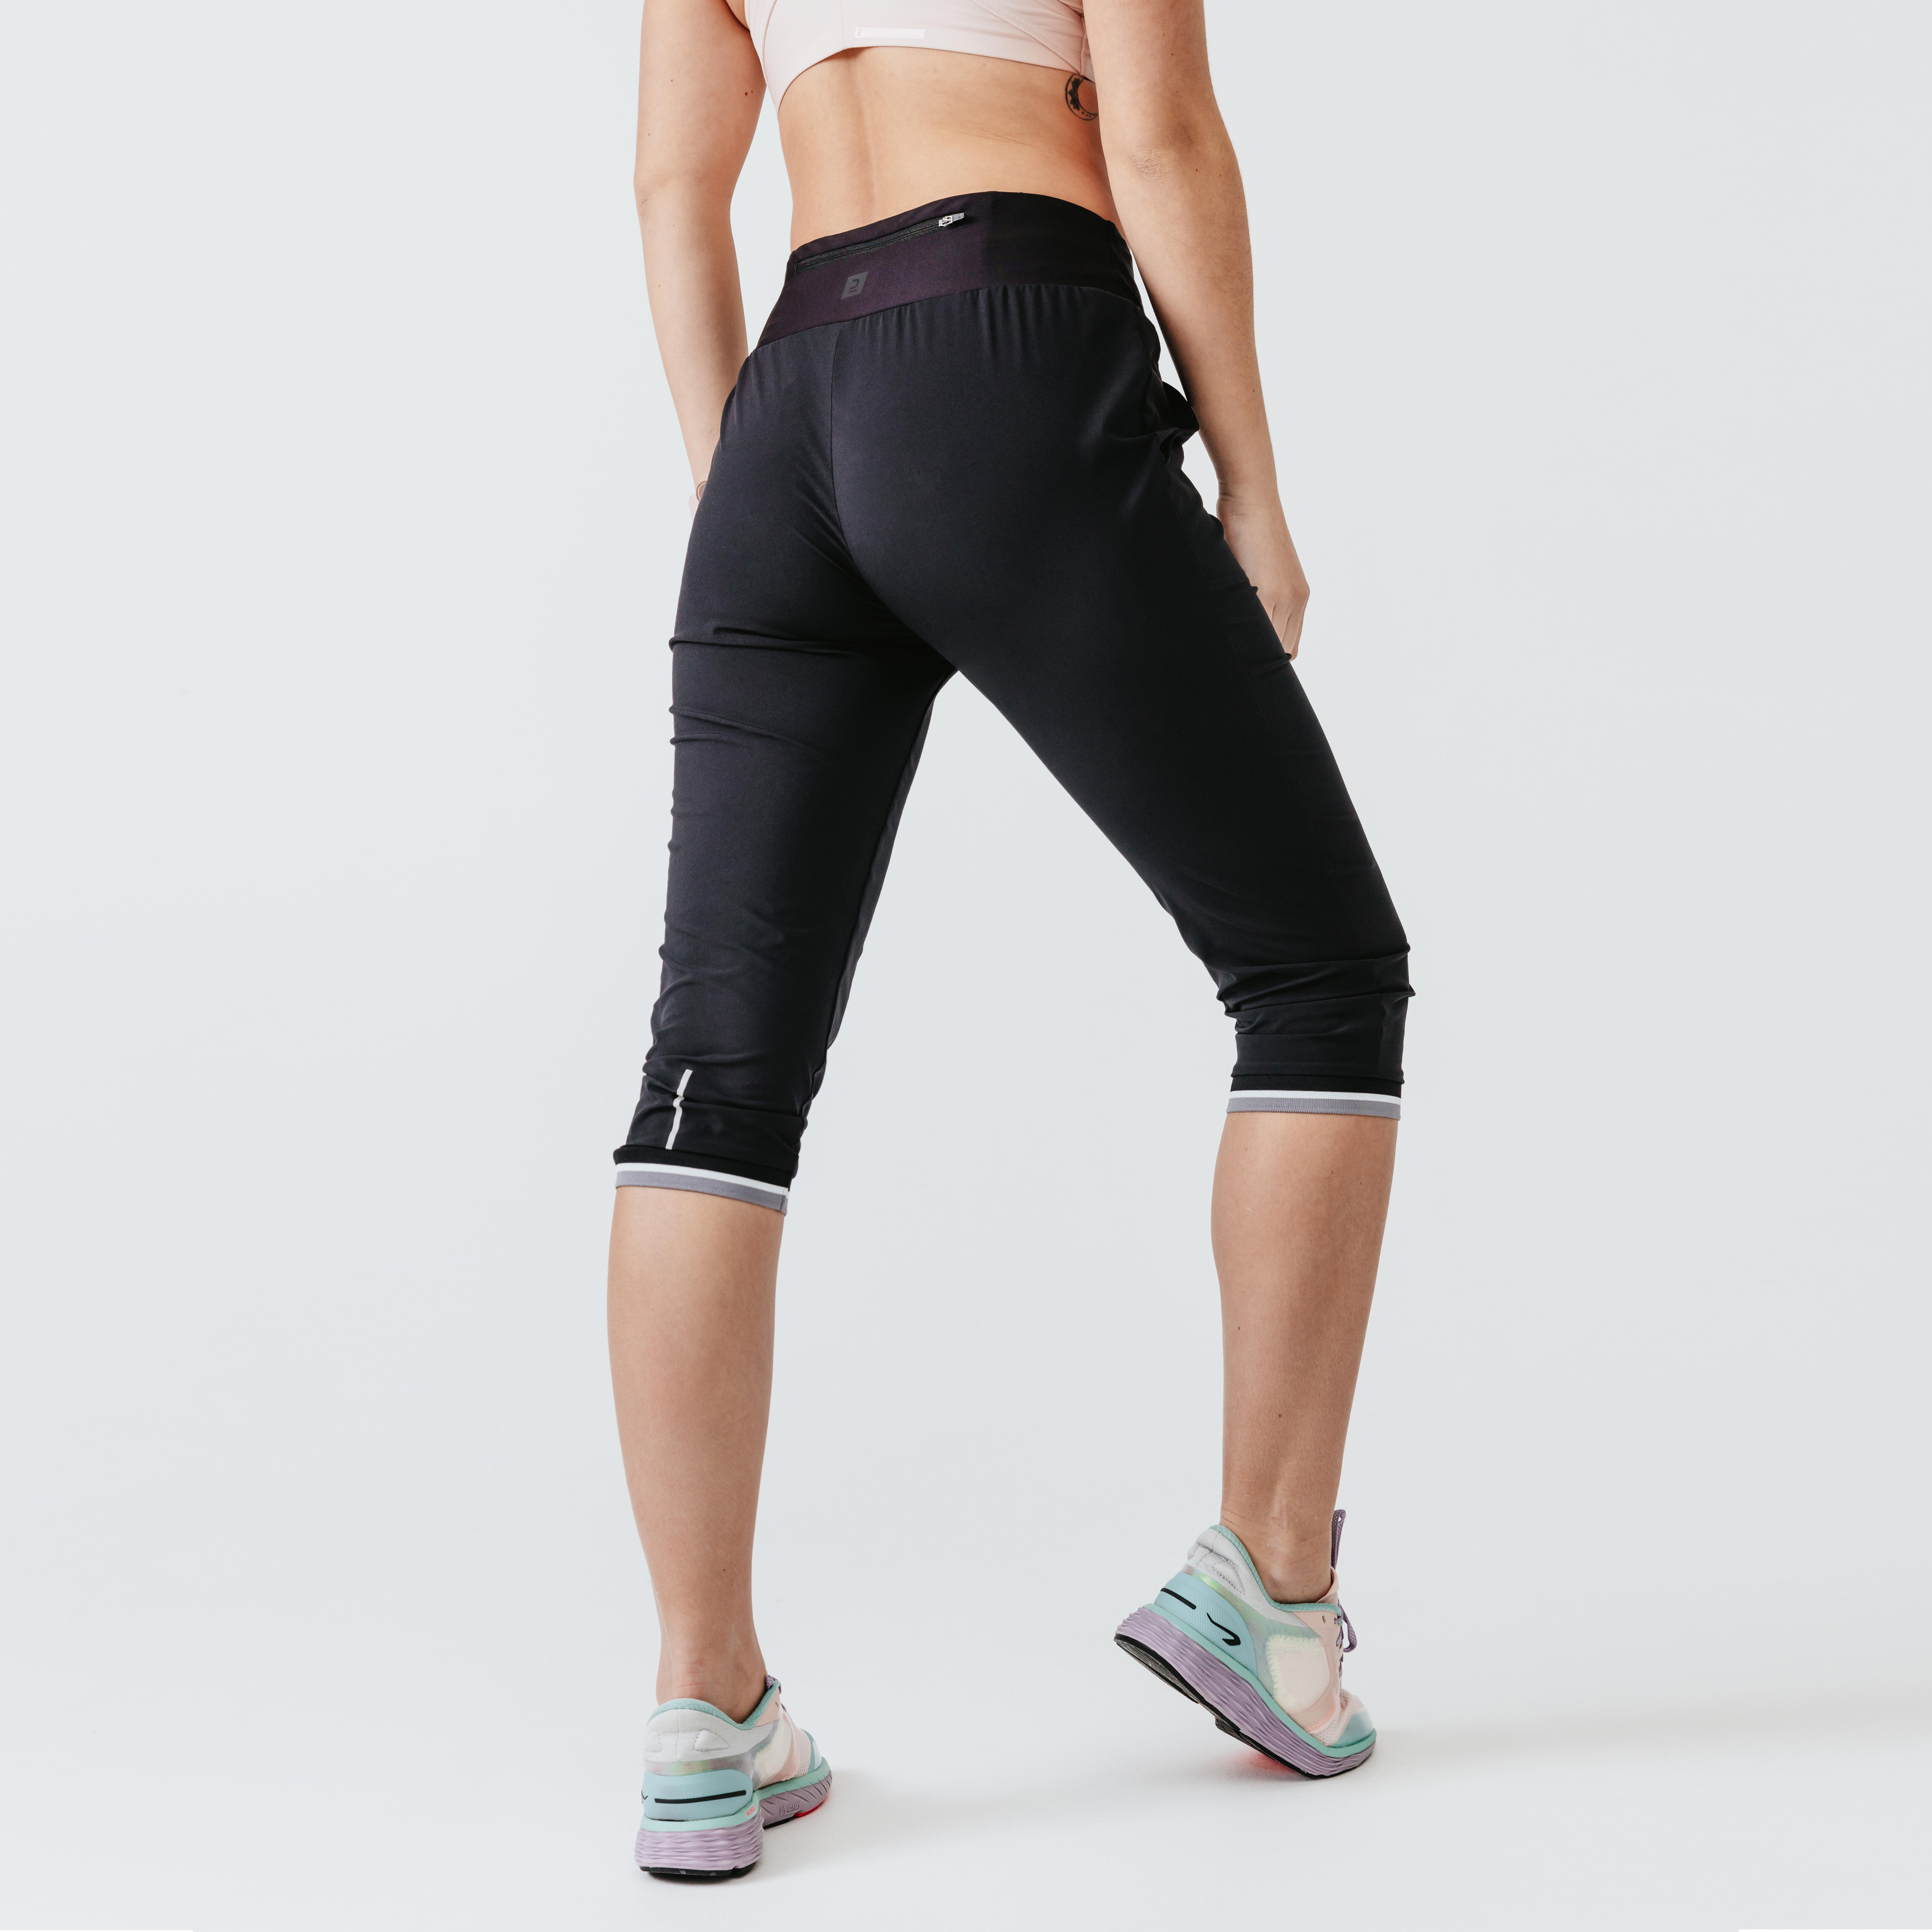 Womens Running Pants Online  Buy Running Pants for Women in India  Best  Prices  Amazonin